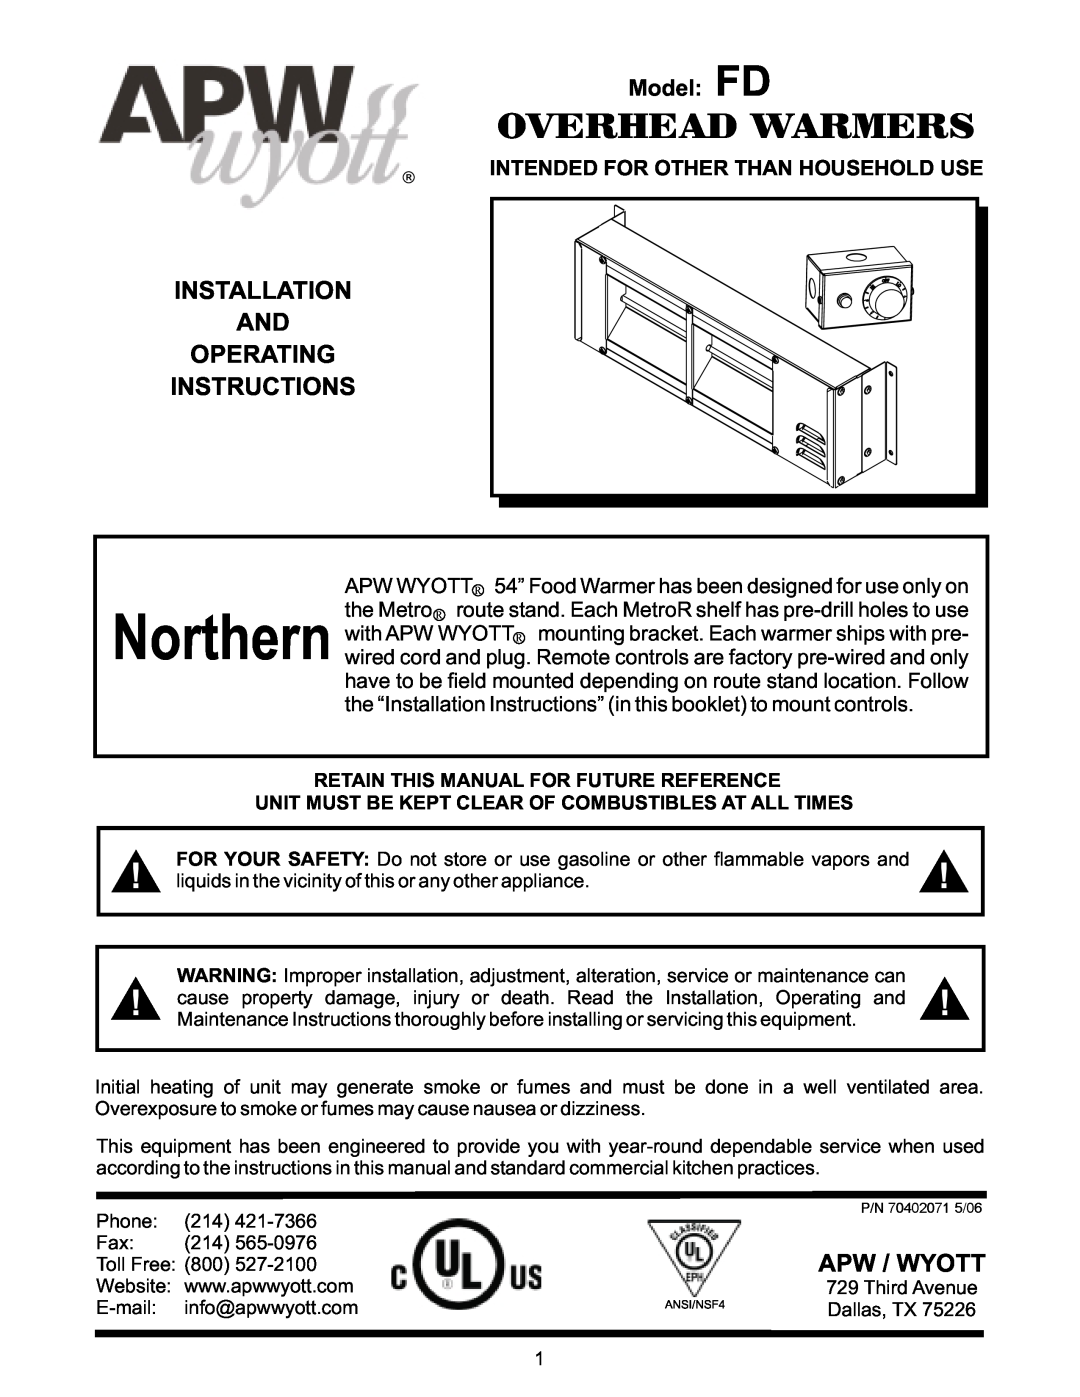 APW installation instructions Installation And Operating Instructions, Apw / Wyott, Overhead Warmers, Model FD 